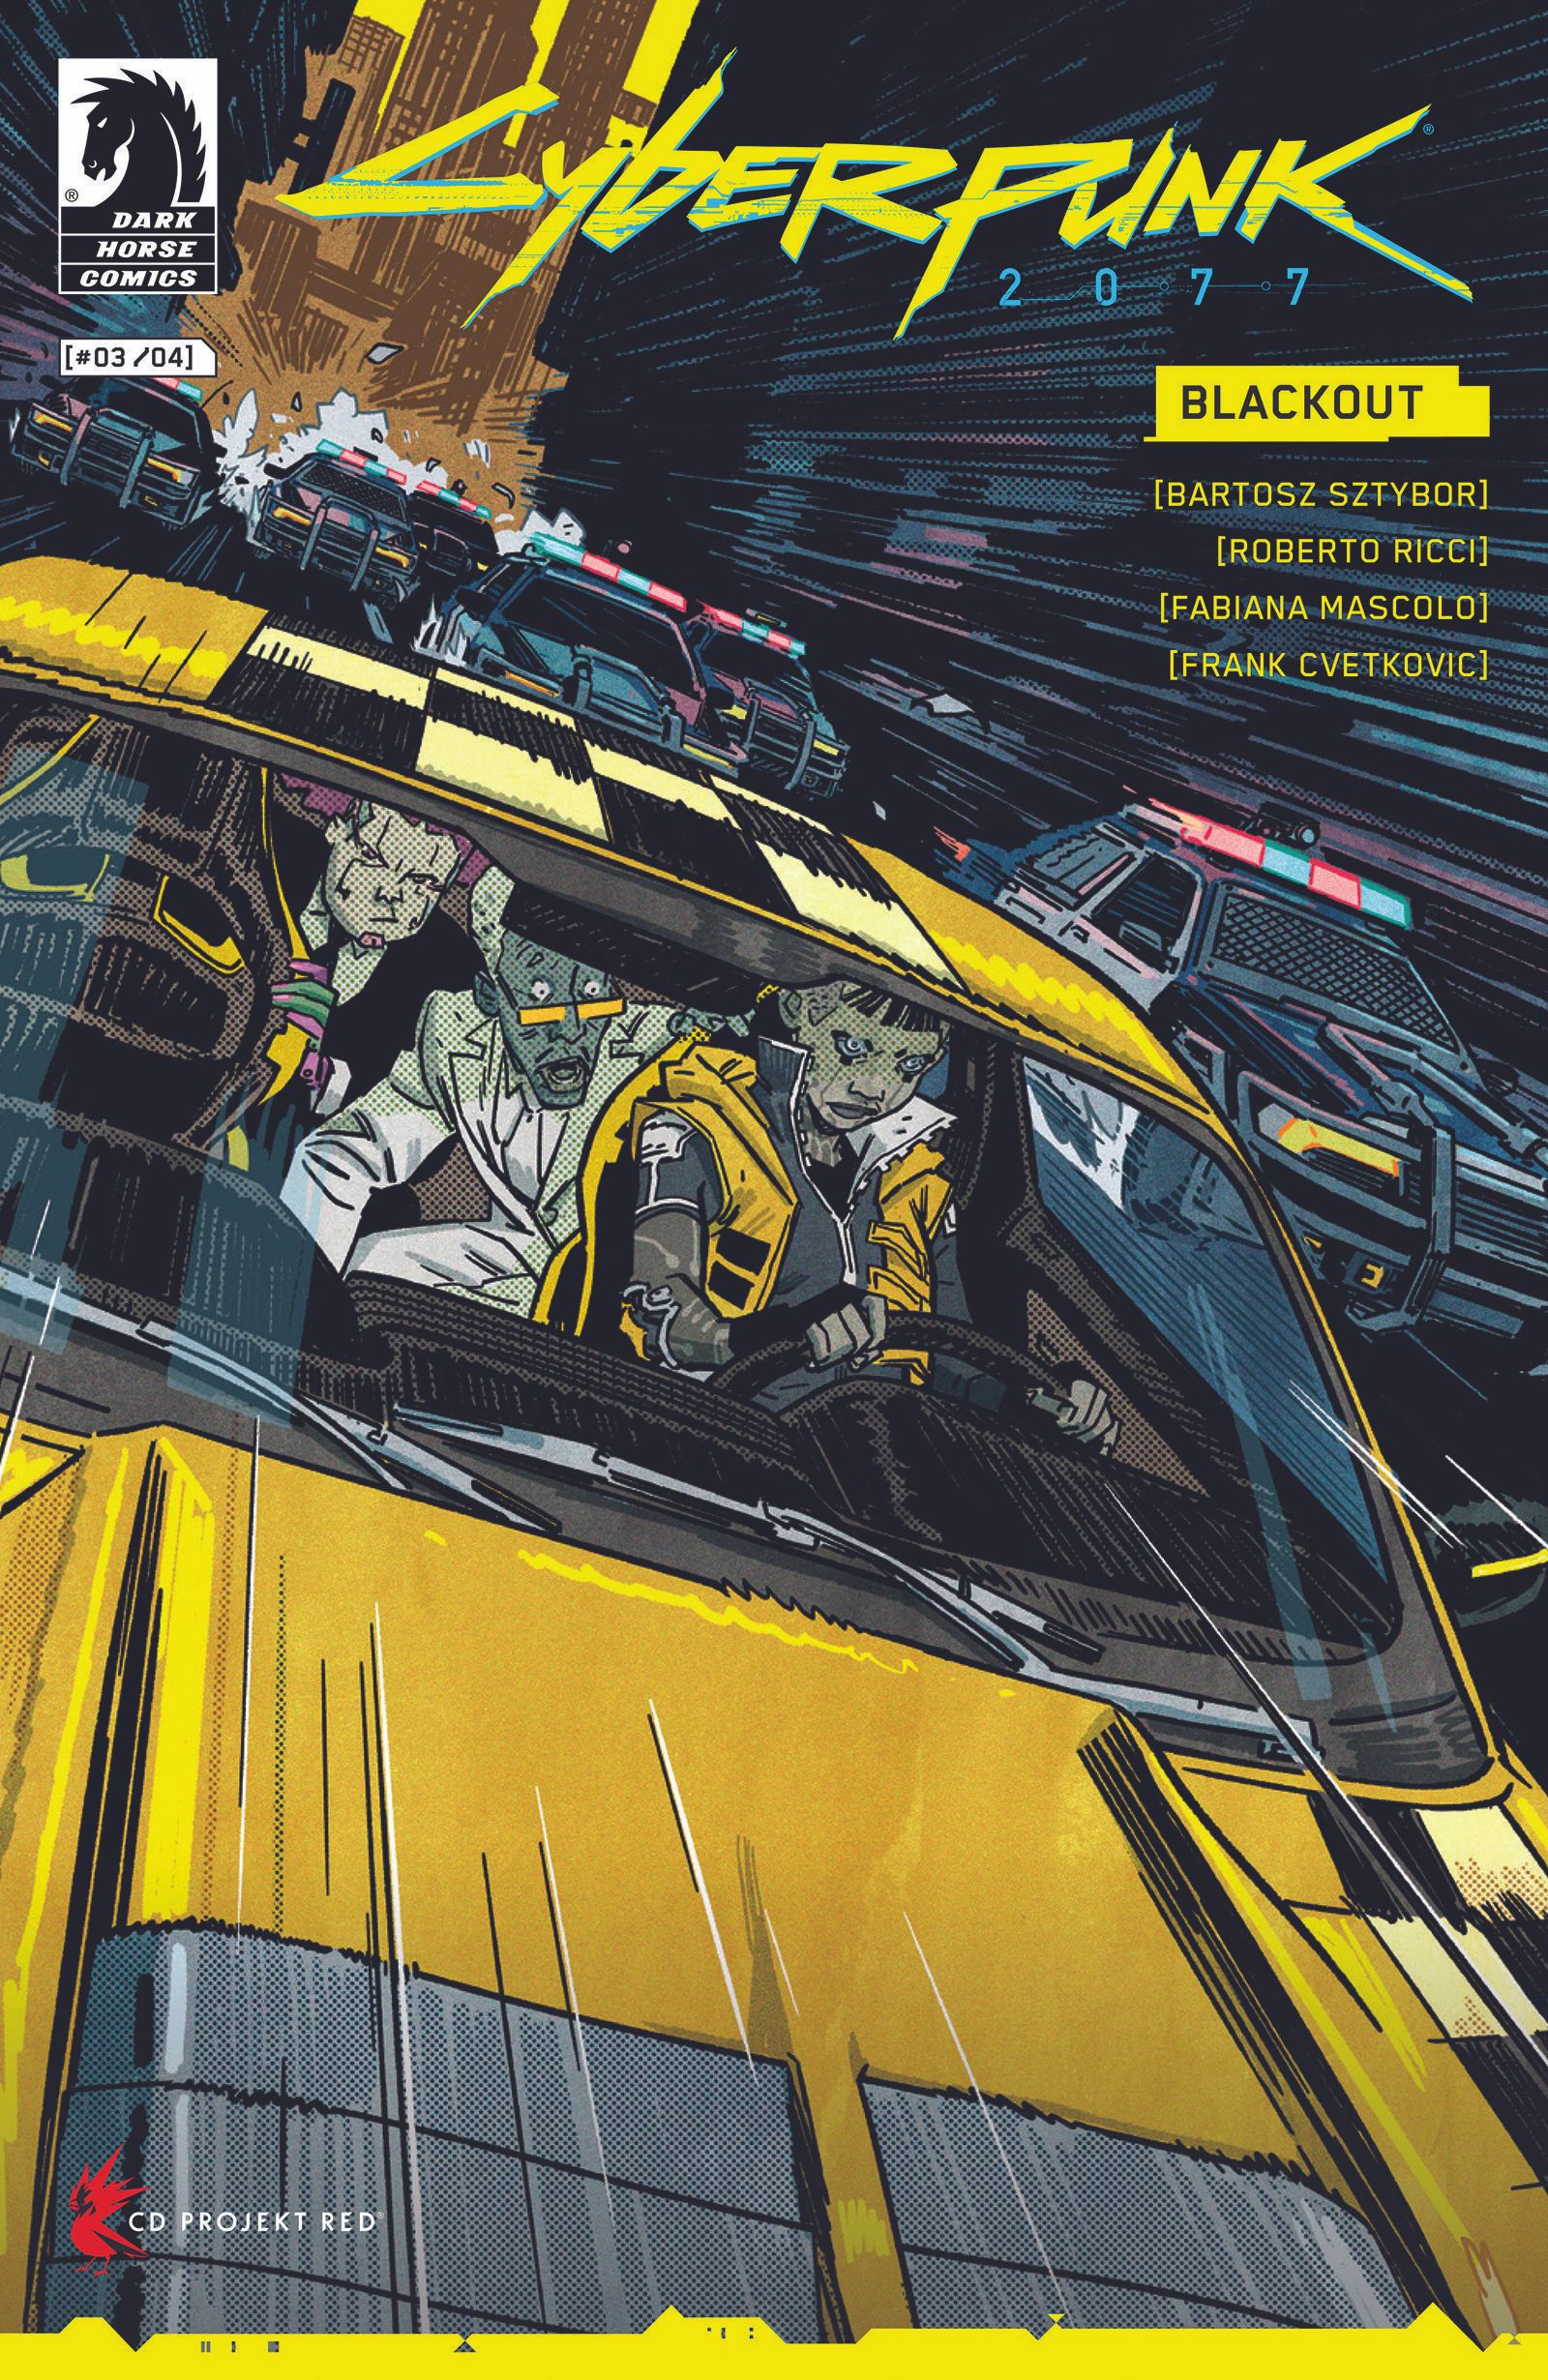 Cyberpunk 2077 Blackout Issue 3 cover